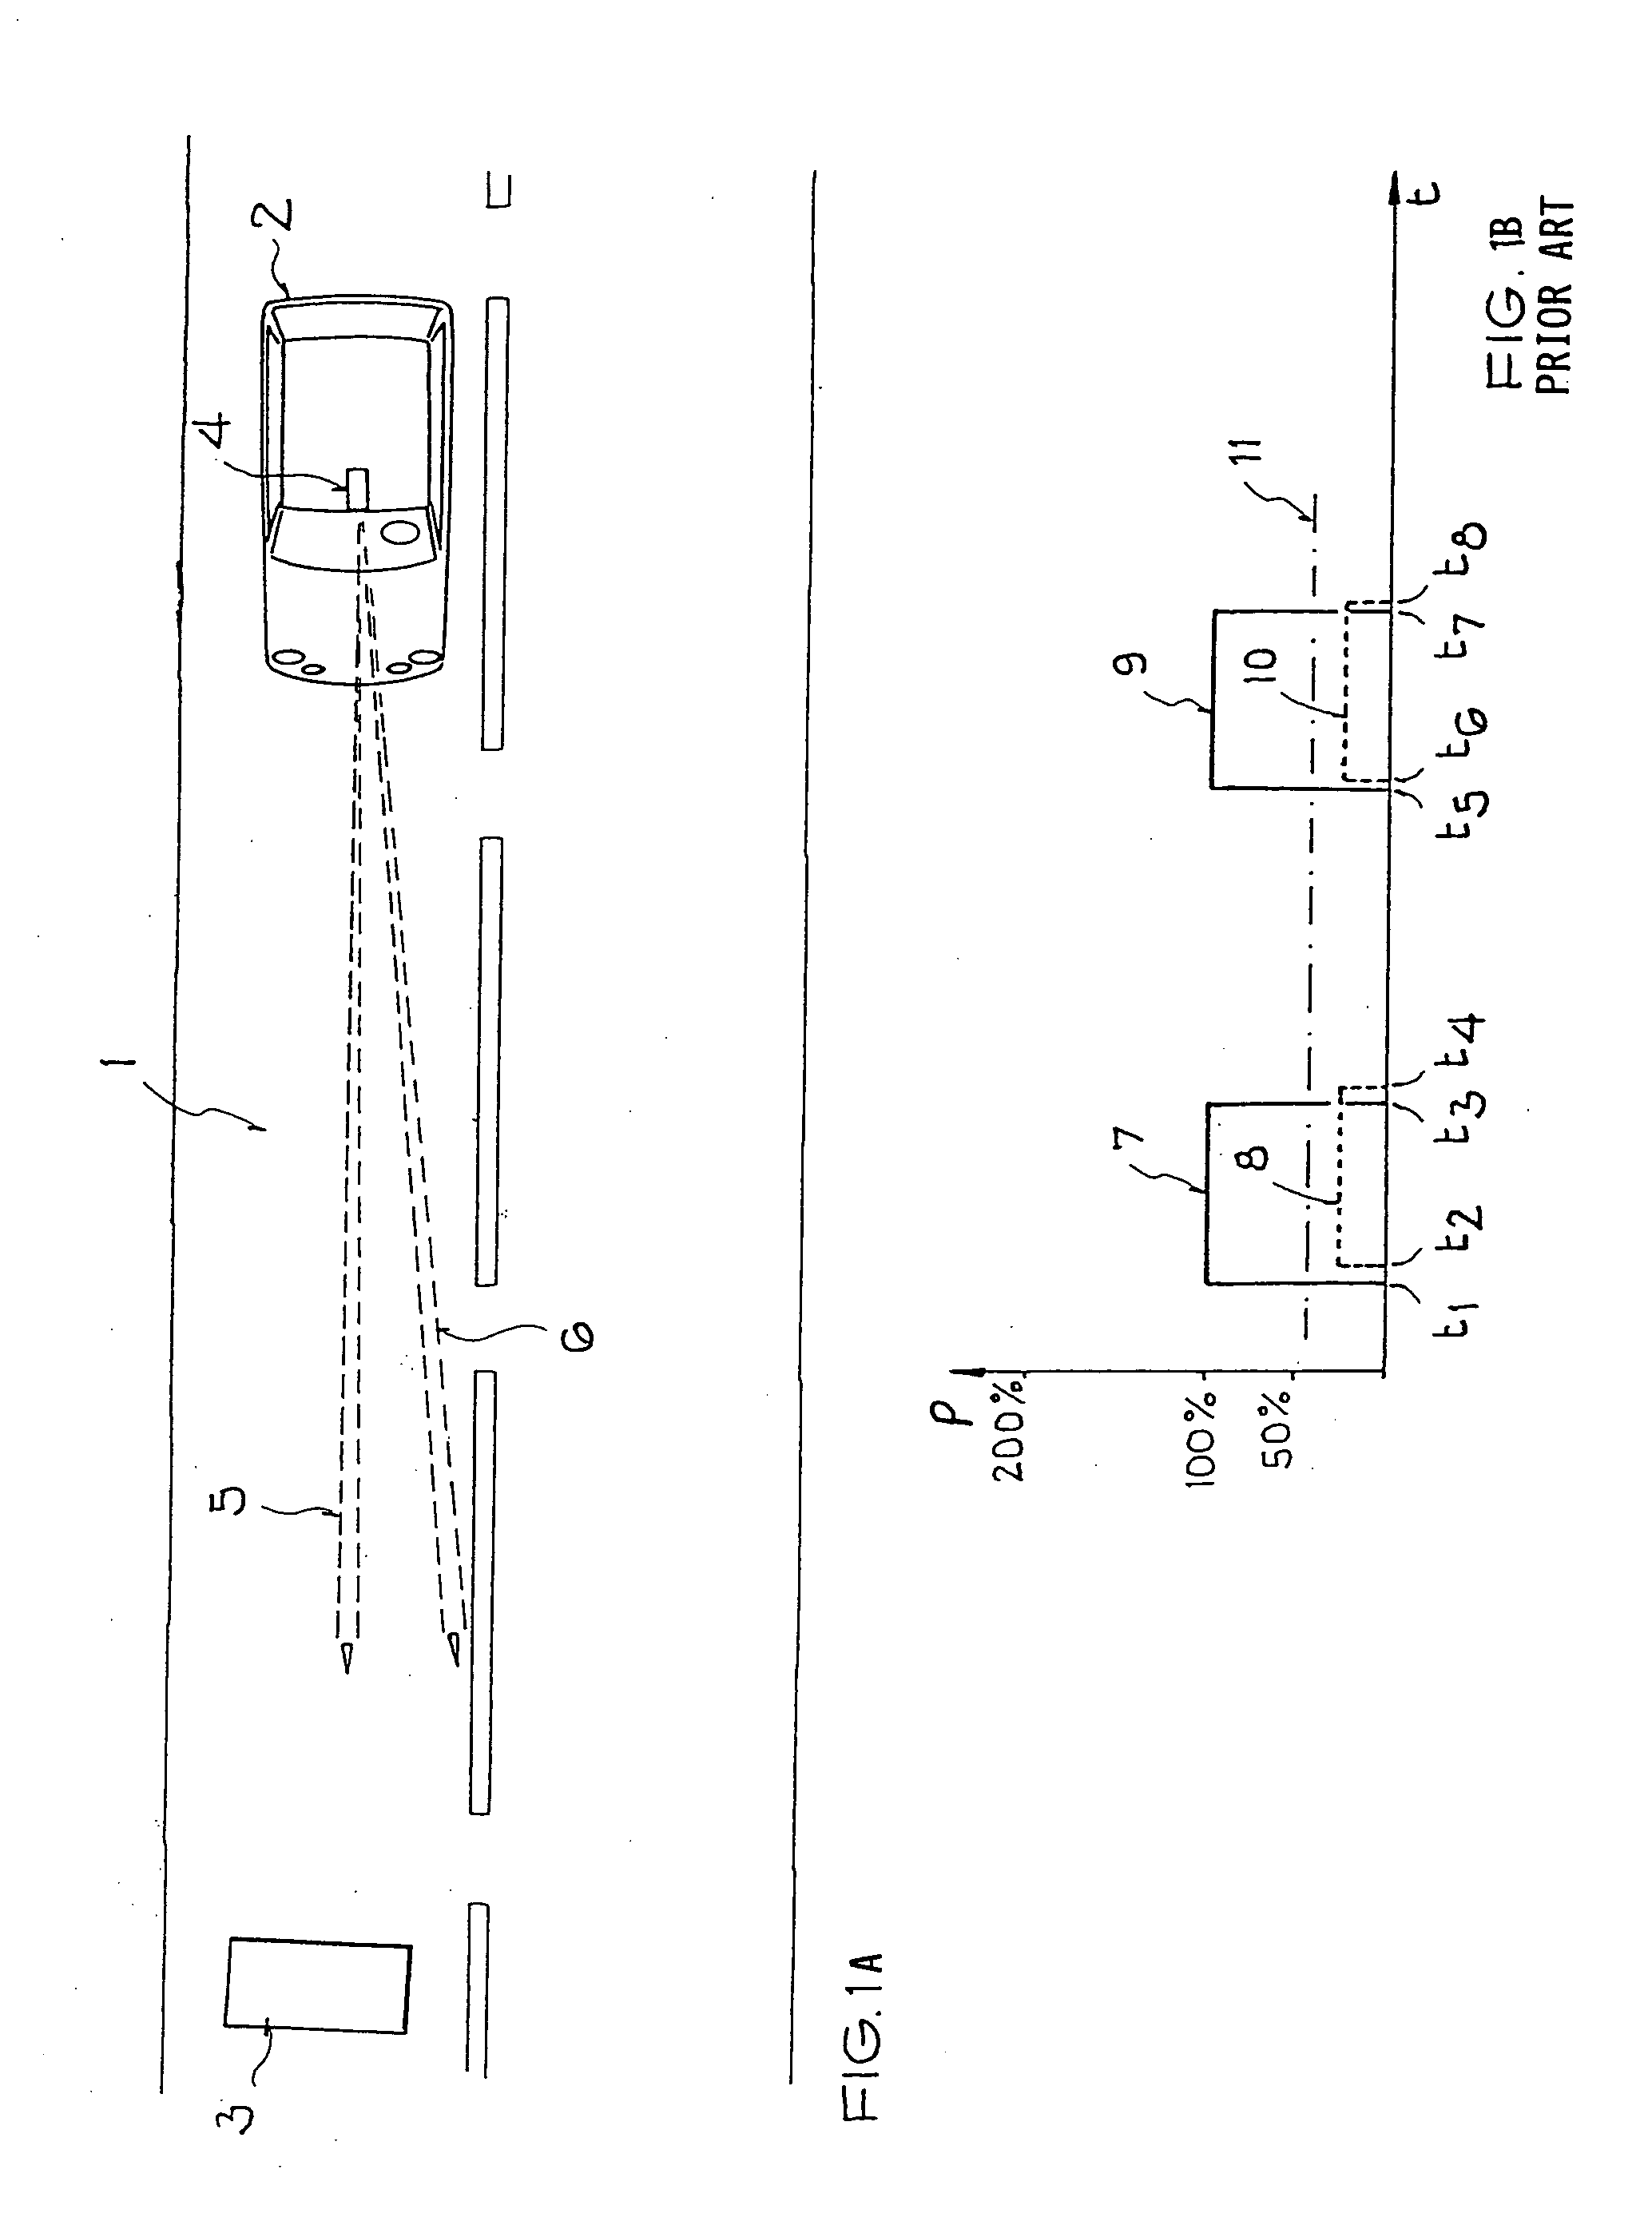 Method of operating an active obstacle warning system